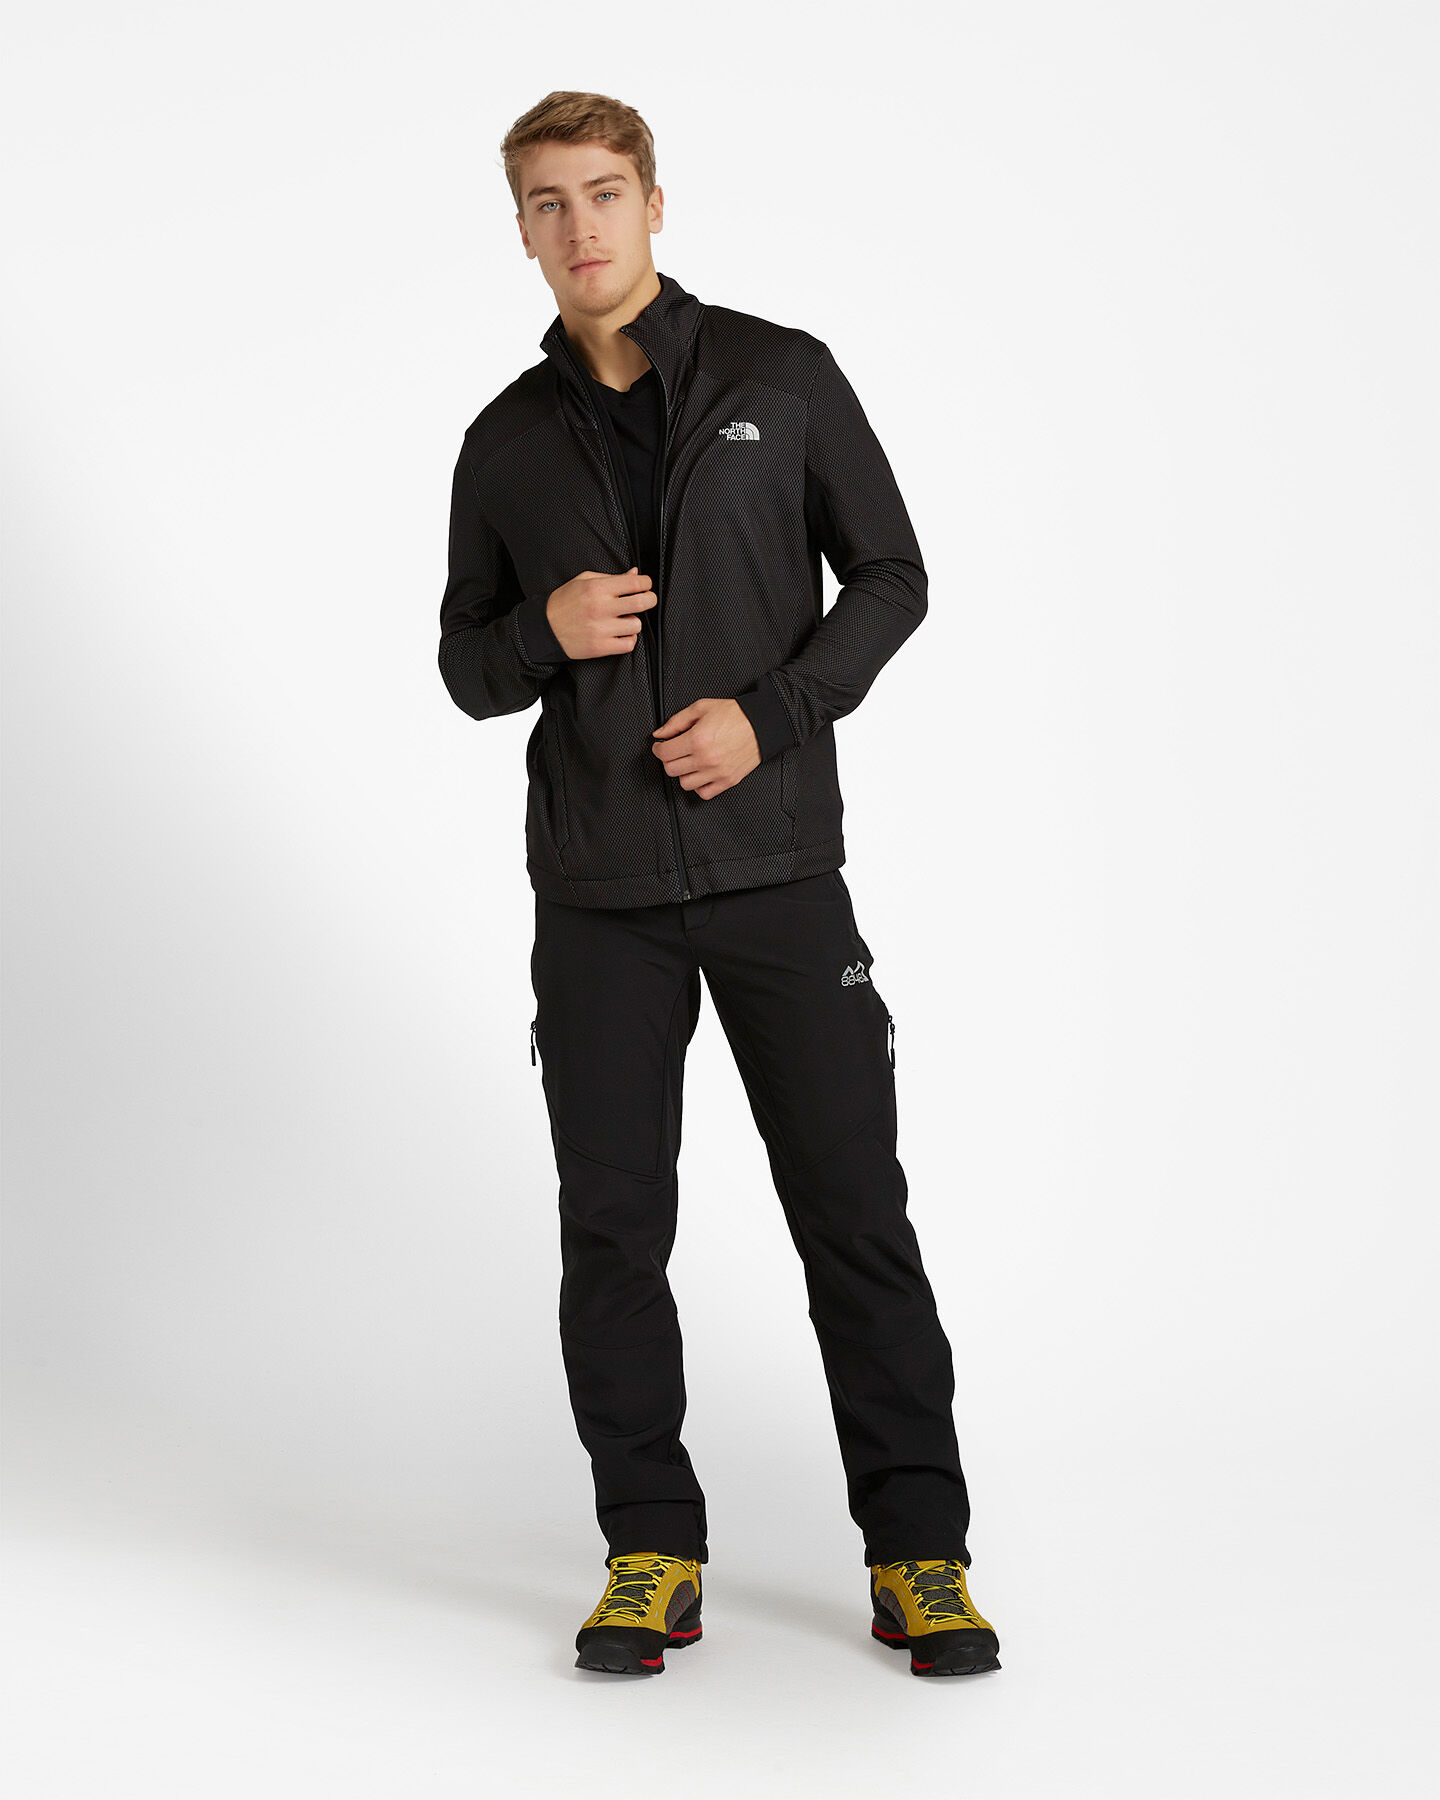  Pile THE NORTH FACE APEX MIDLAYER M S5018570|JK3|S scatto 1